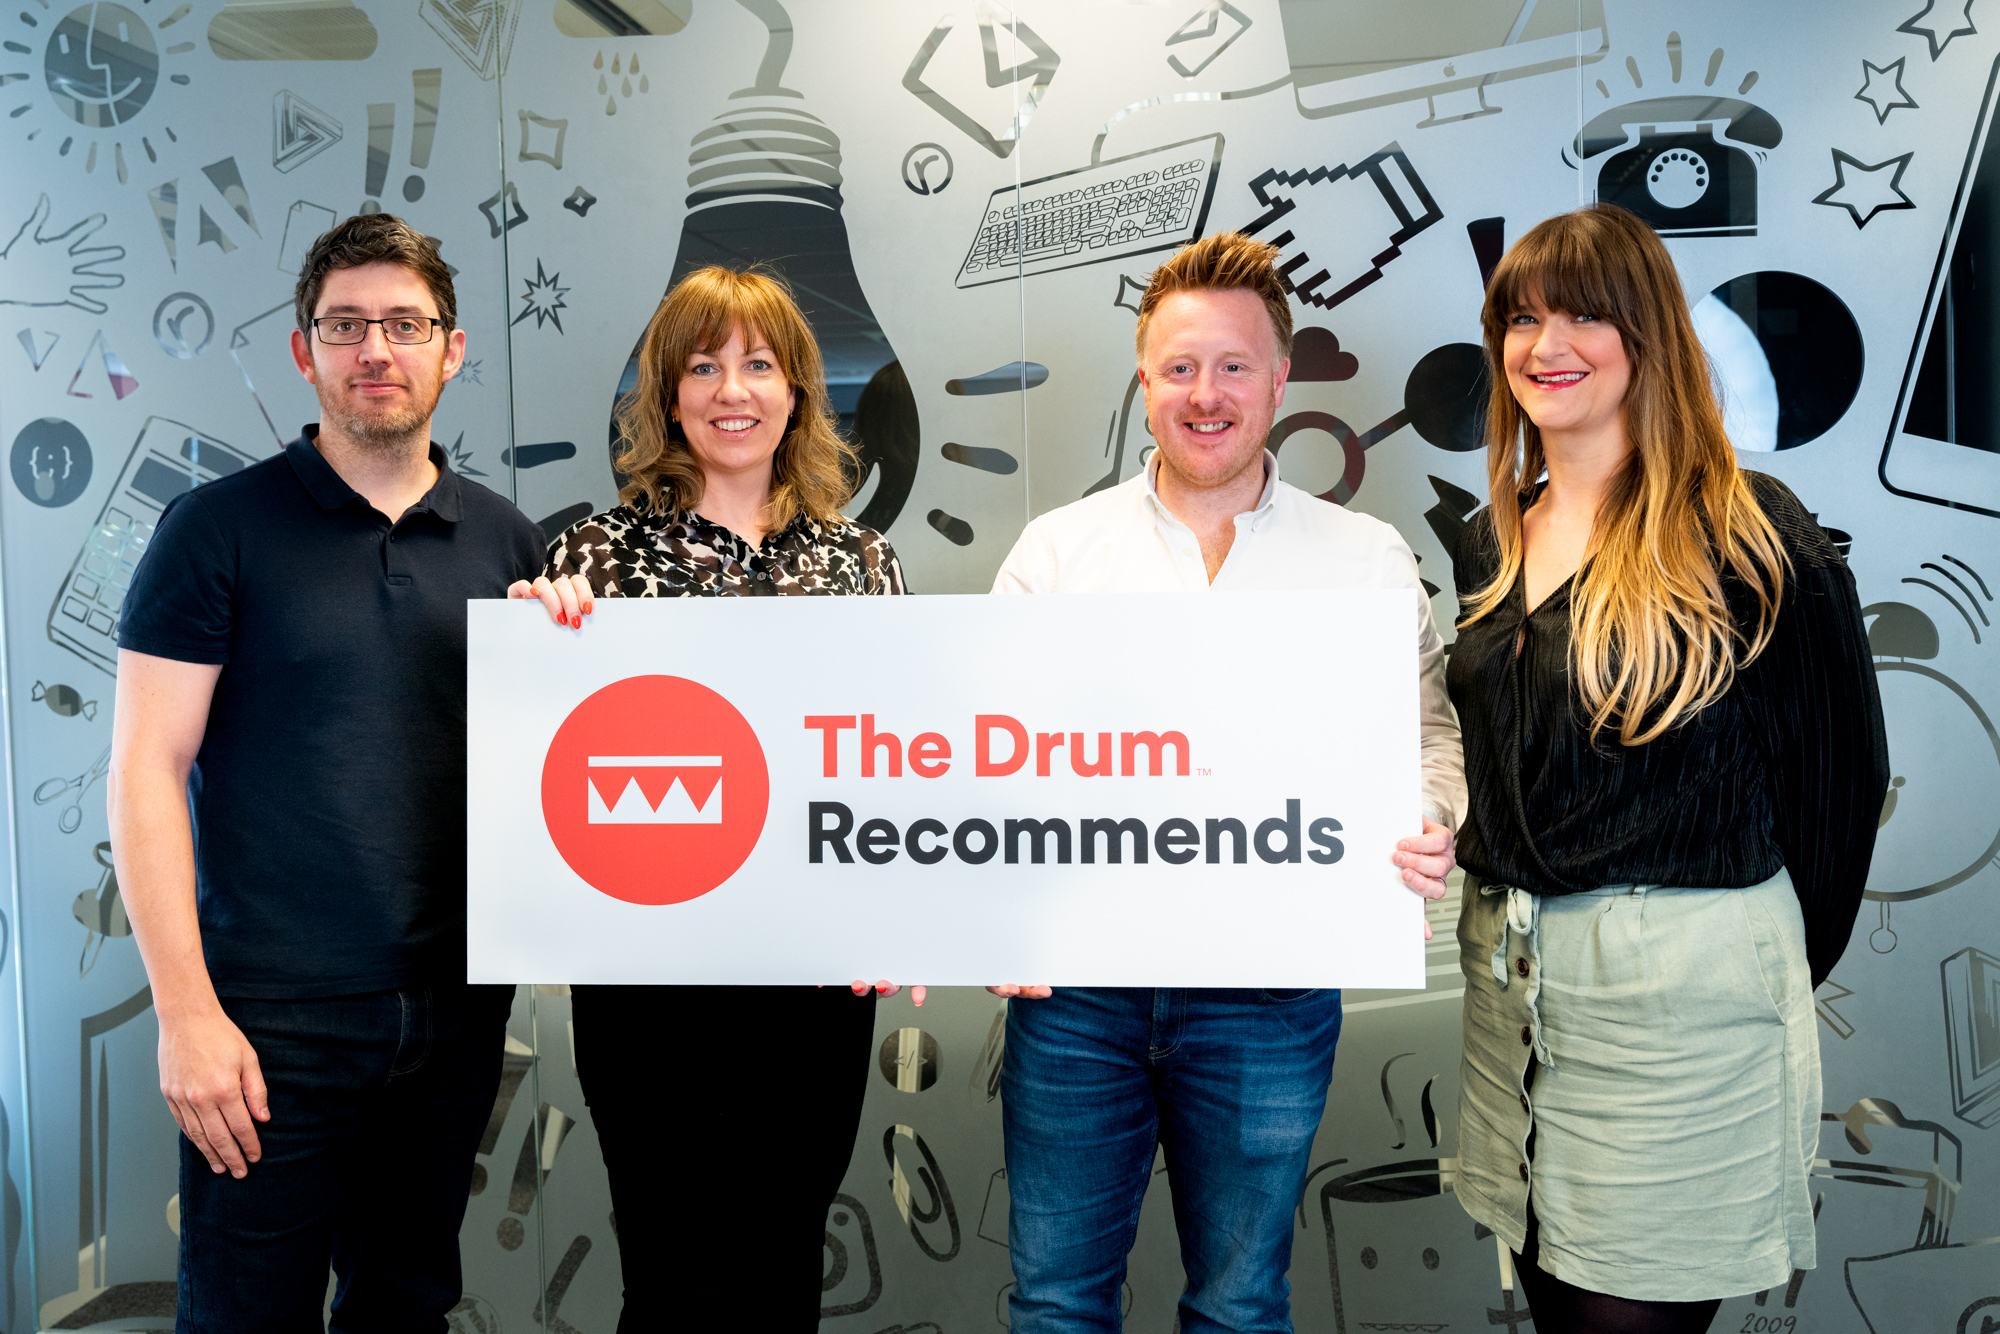 We’re a ‘The Drum Recommends’ marketing agency